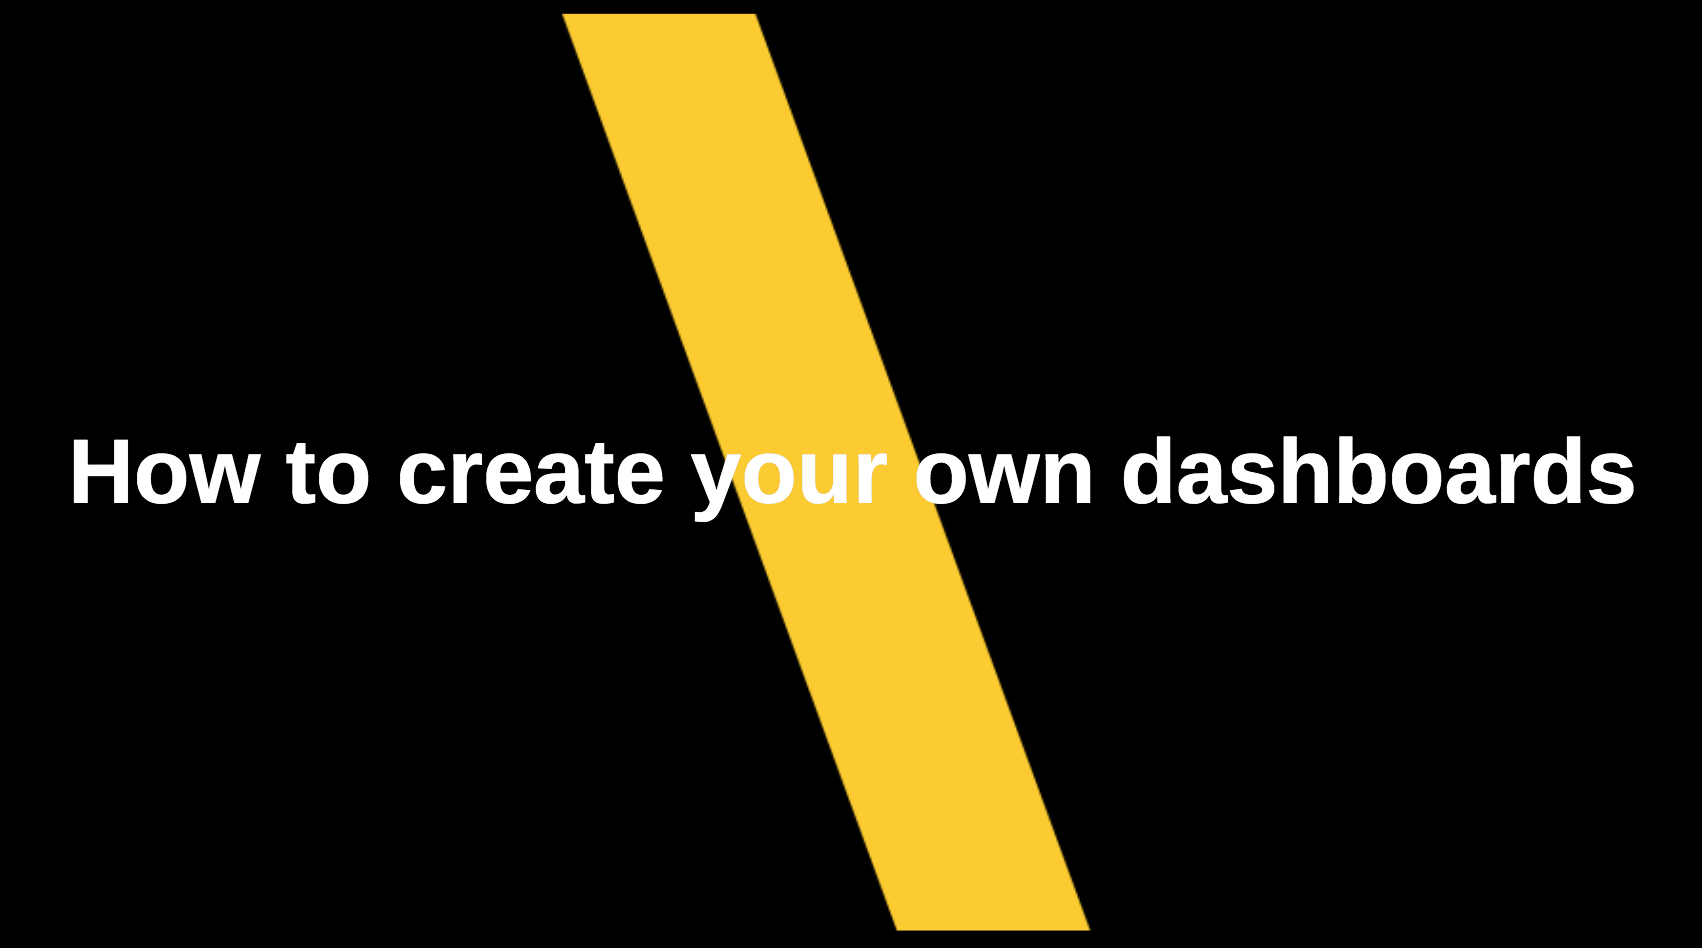 How to create your own dashboards